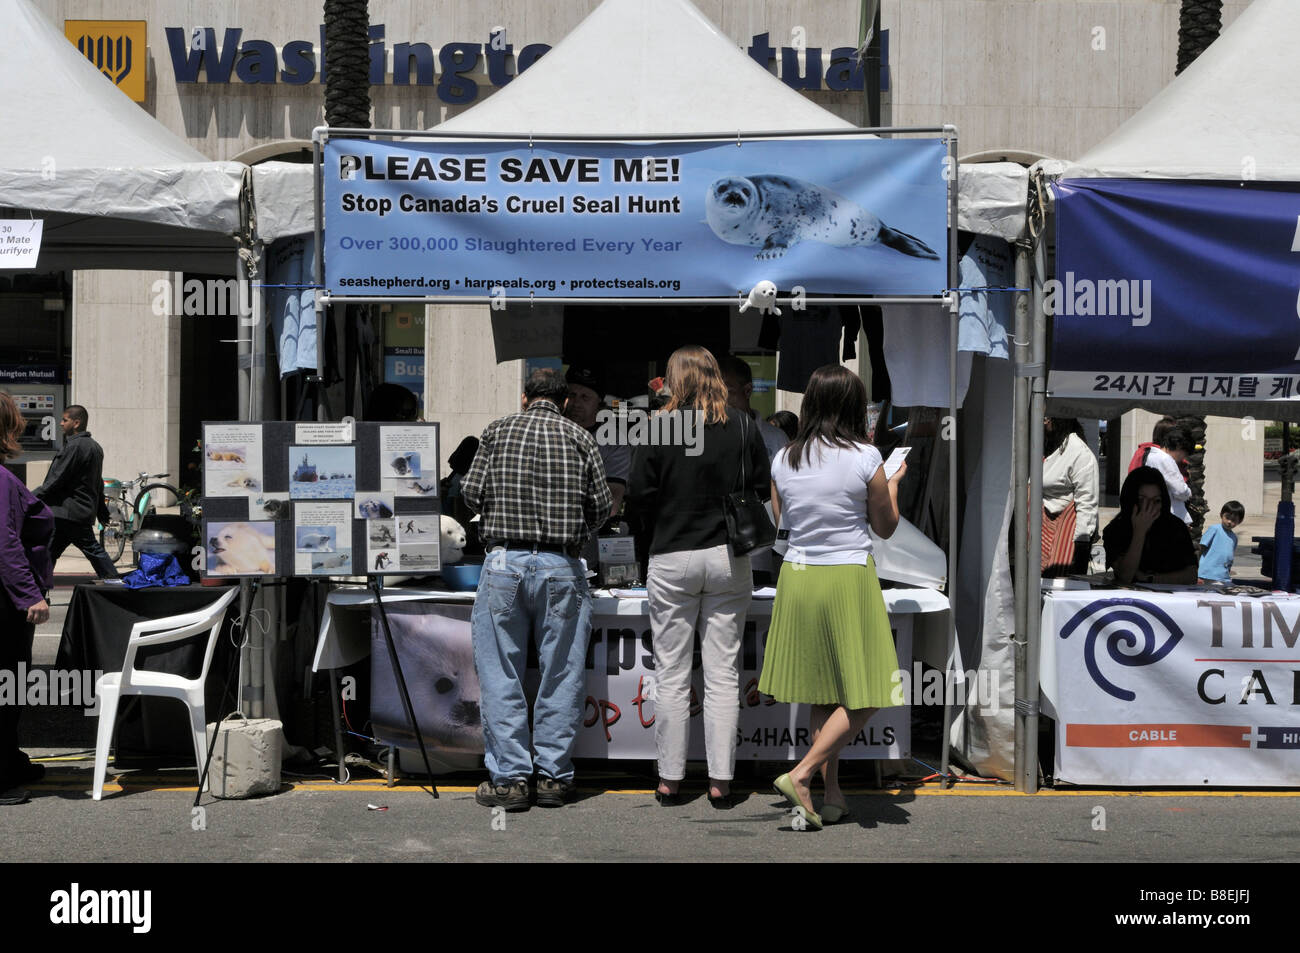 Exhibition booth informing about the cruel baby seal hunts in Canada Stock Photo